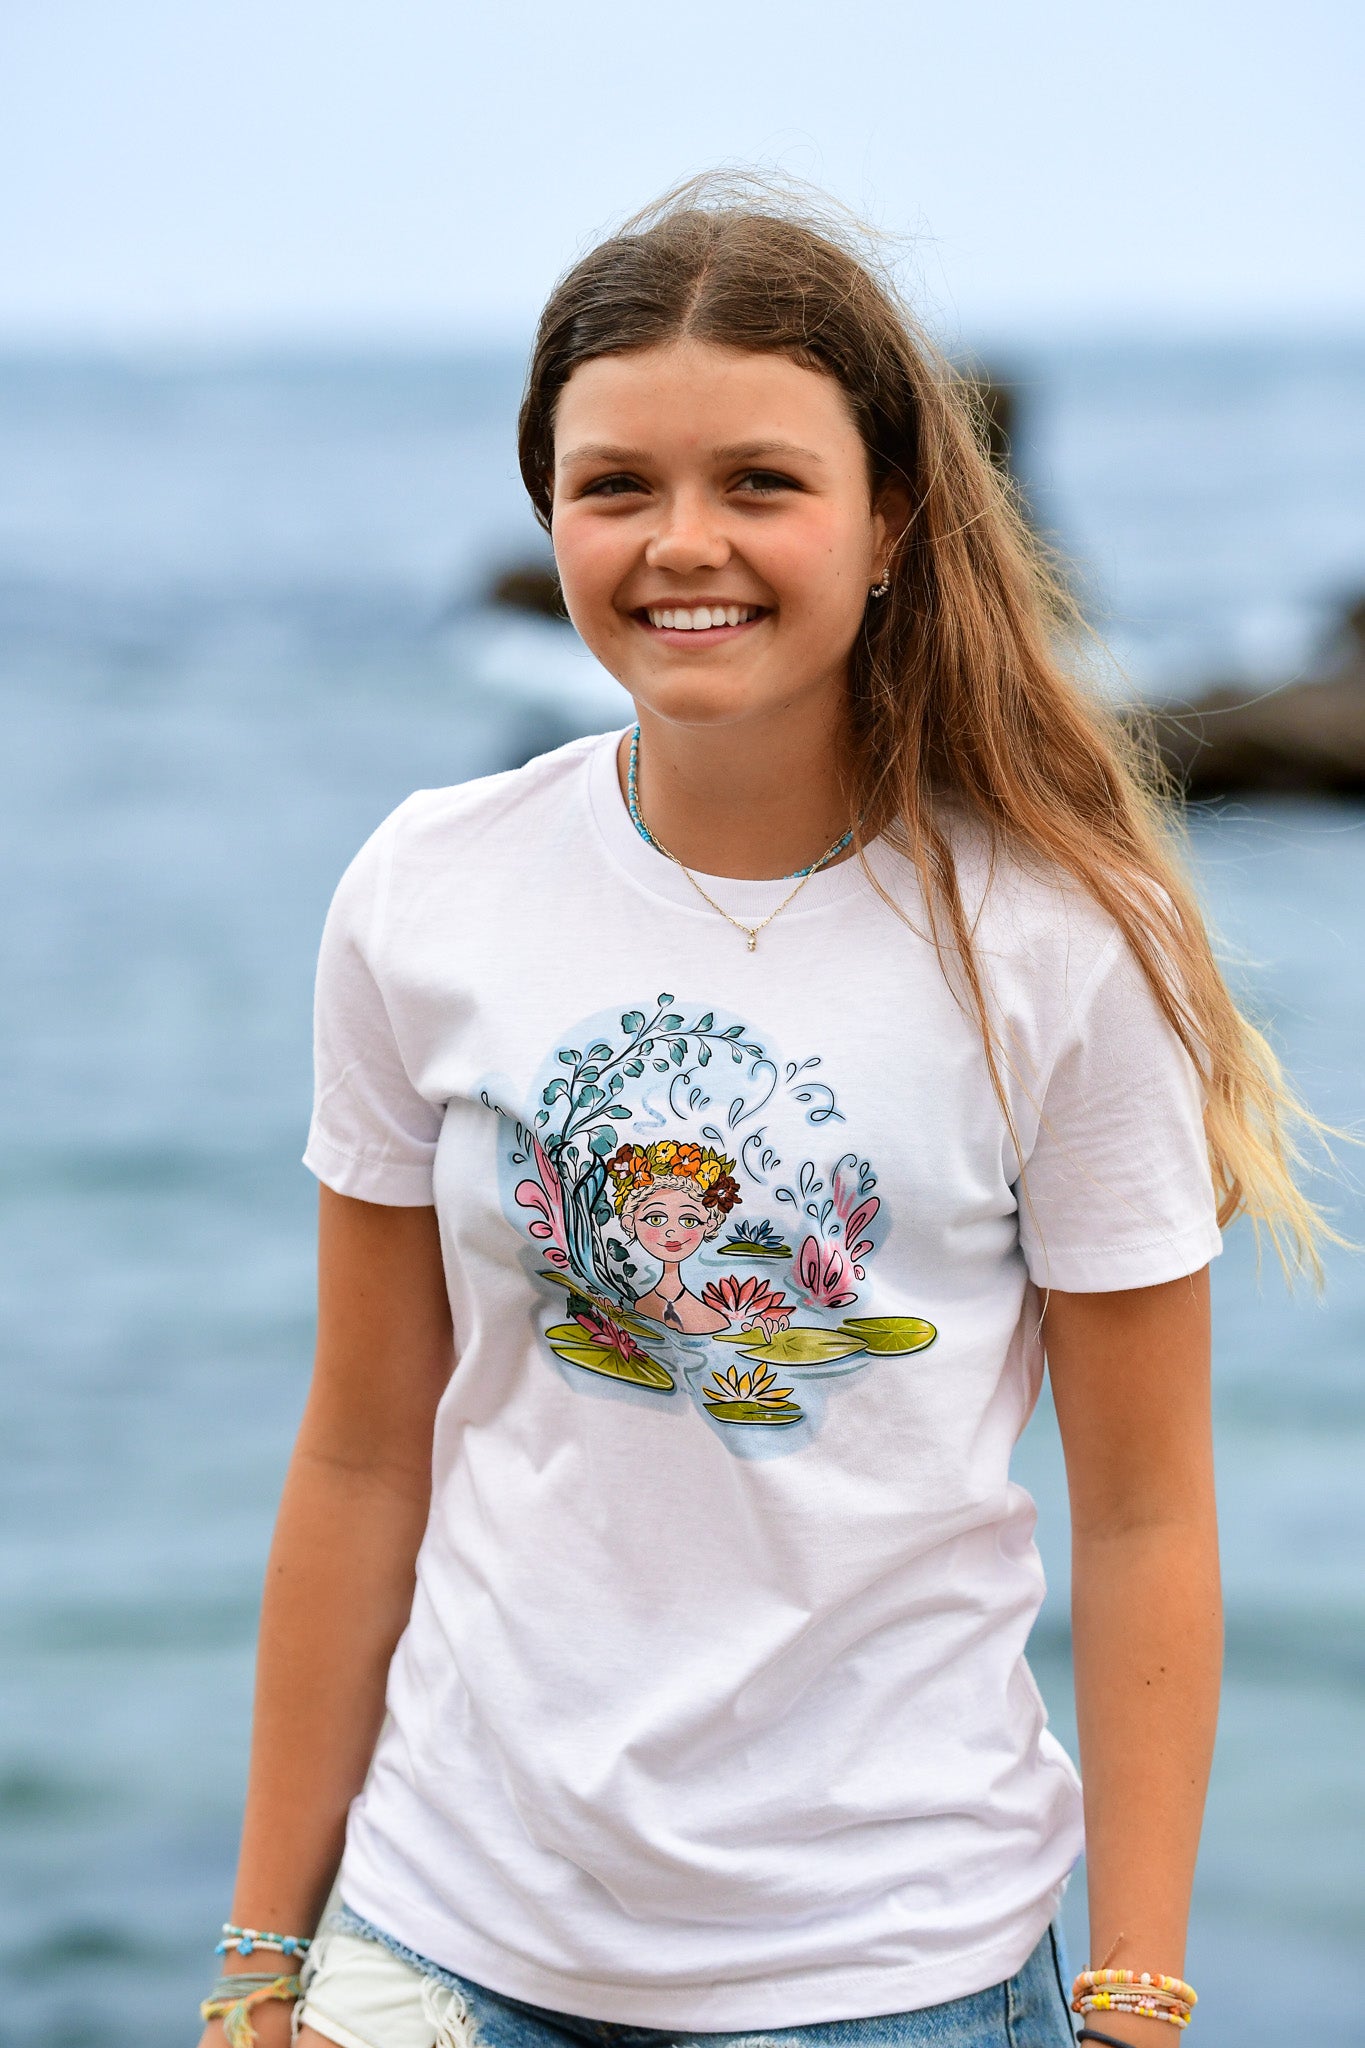 Mermaid among water lilies hand-drawn illustration printed on cotton tee for girls